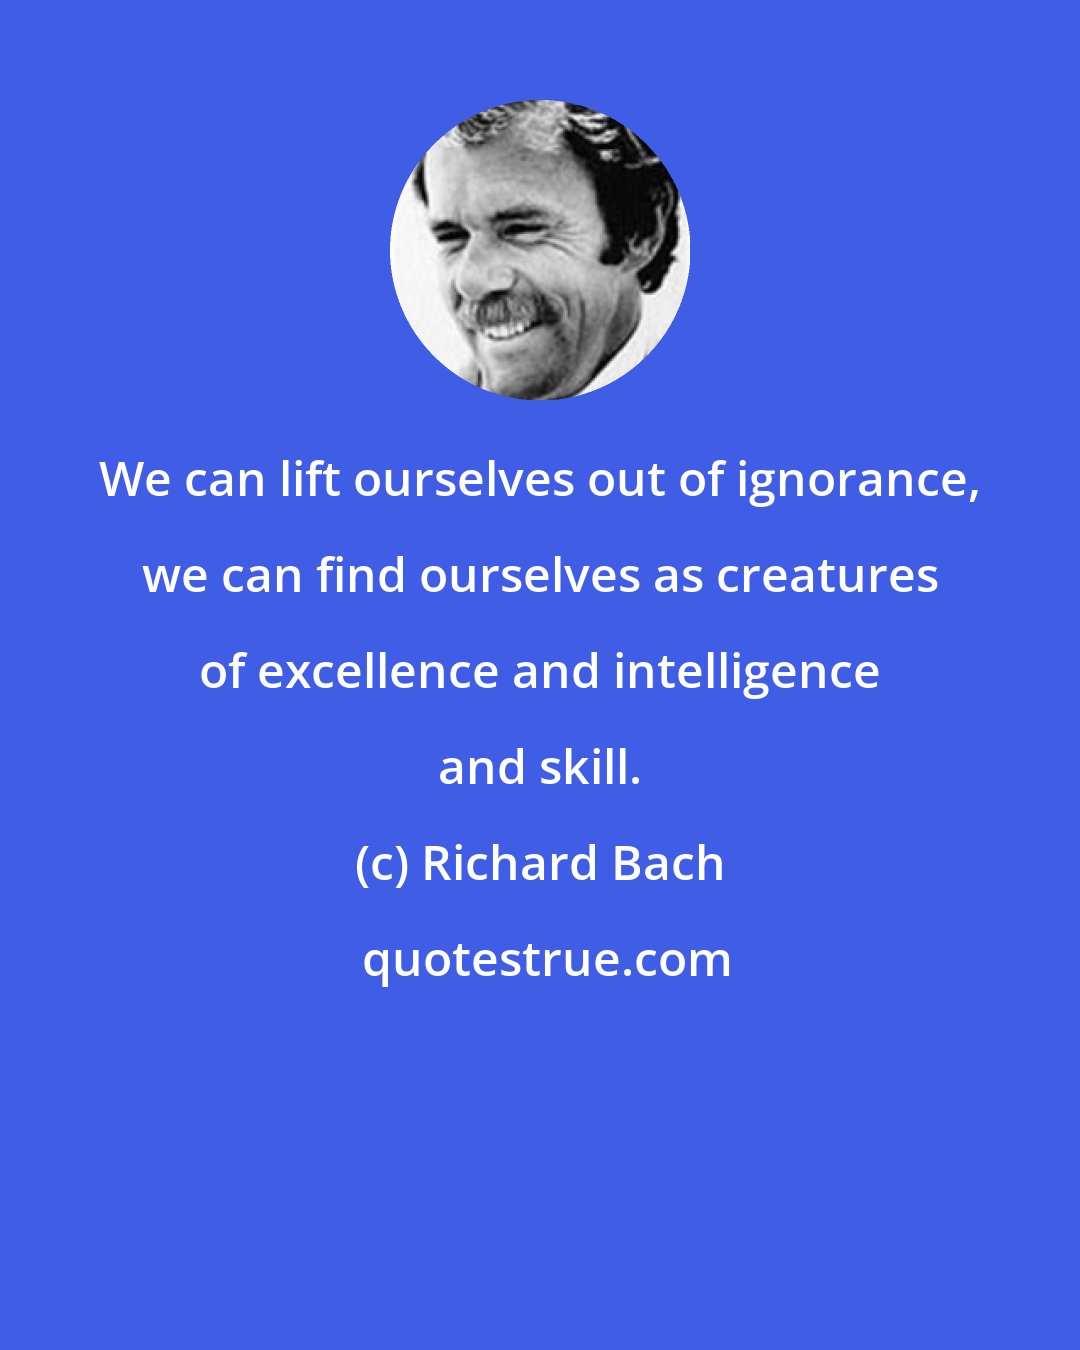 Richard Bach: We can lift ourselves out of ignorance, we can find ourselves as creatures of excellence and intelligence and skill.